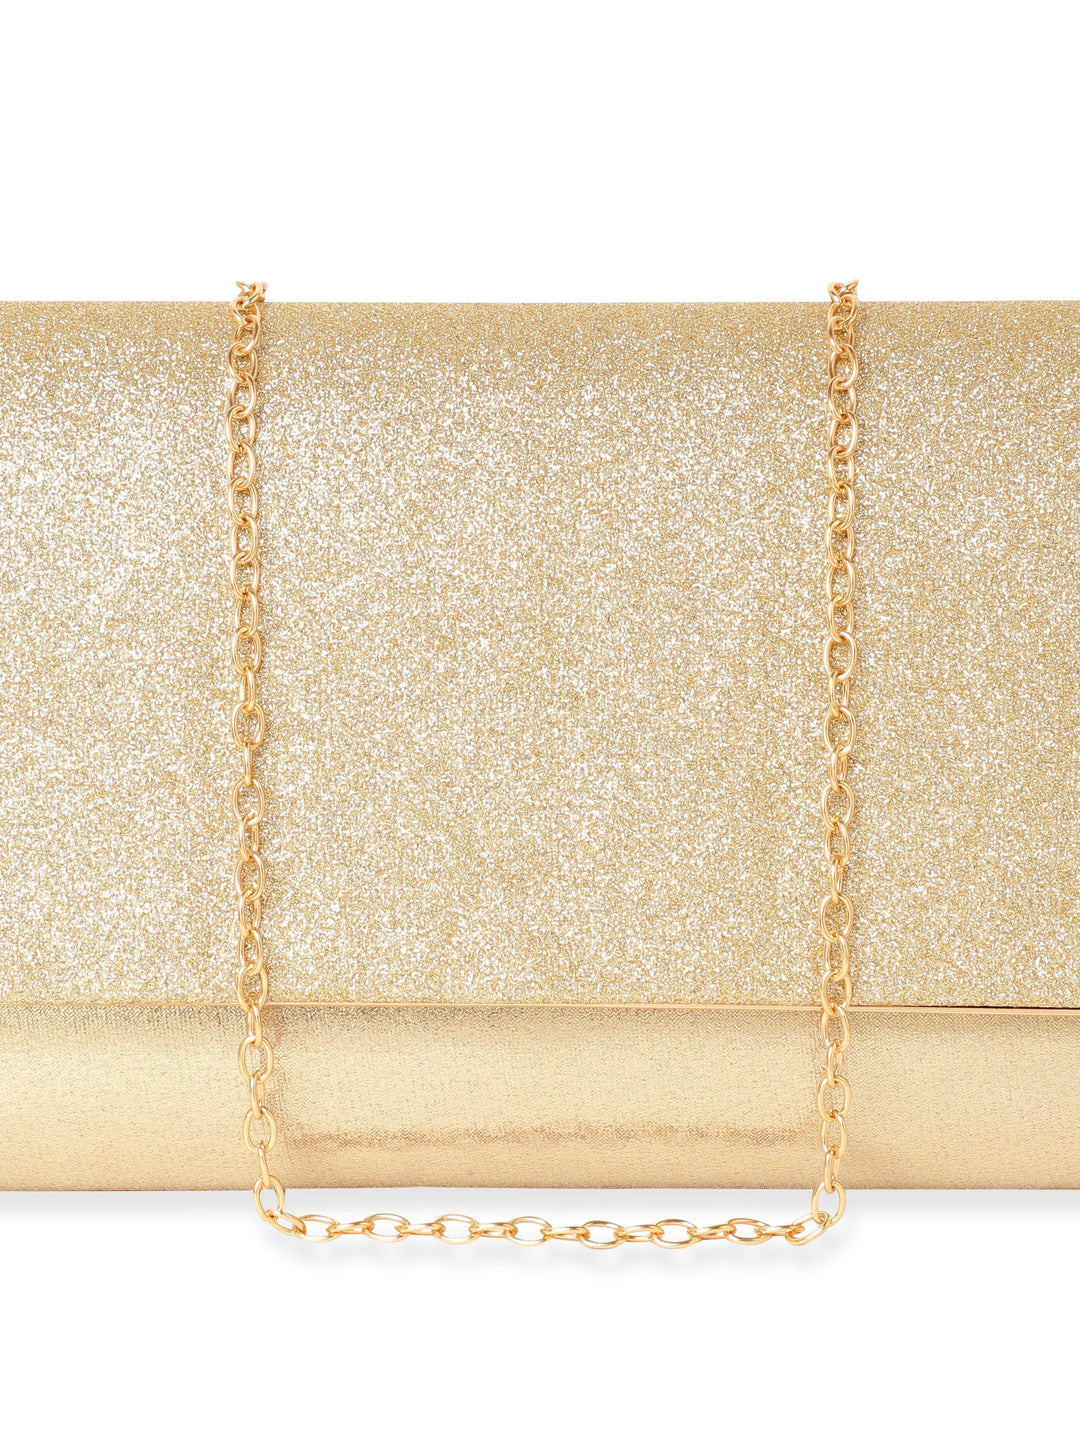 Rubans Starlit Opulence Handcrafted Shimmery Clutch Bag Handbag, Wallet Accessories & Clutches